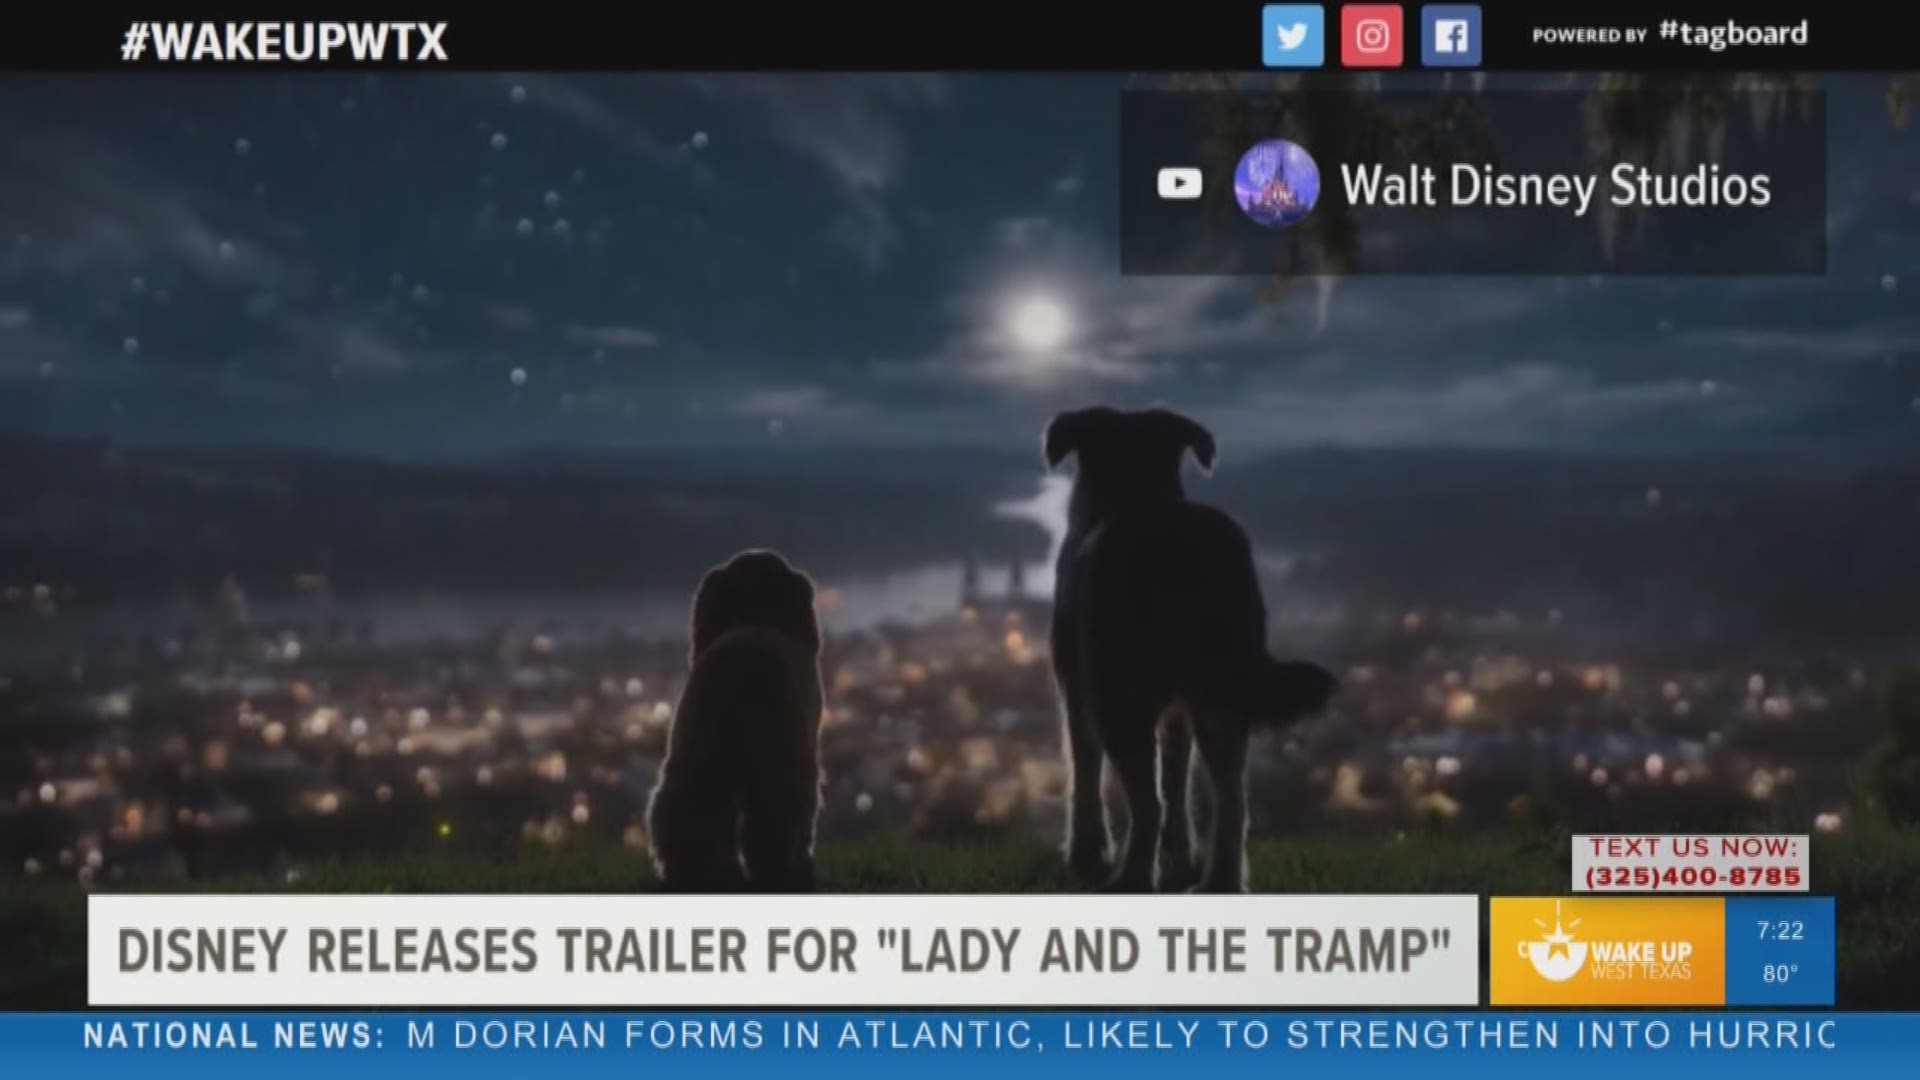 Our Malik Mingo shared what people said on social media about the live-action remake trailer of Disney's "The Lady and the Tramp."